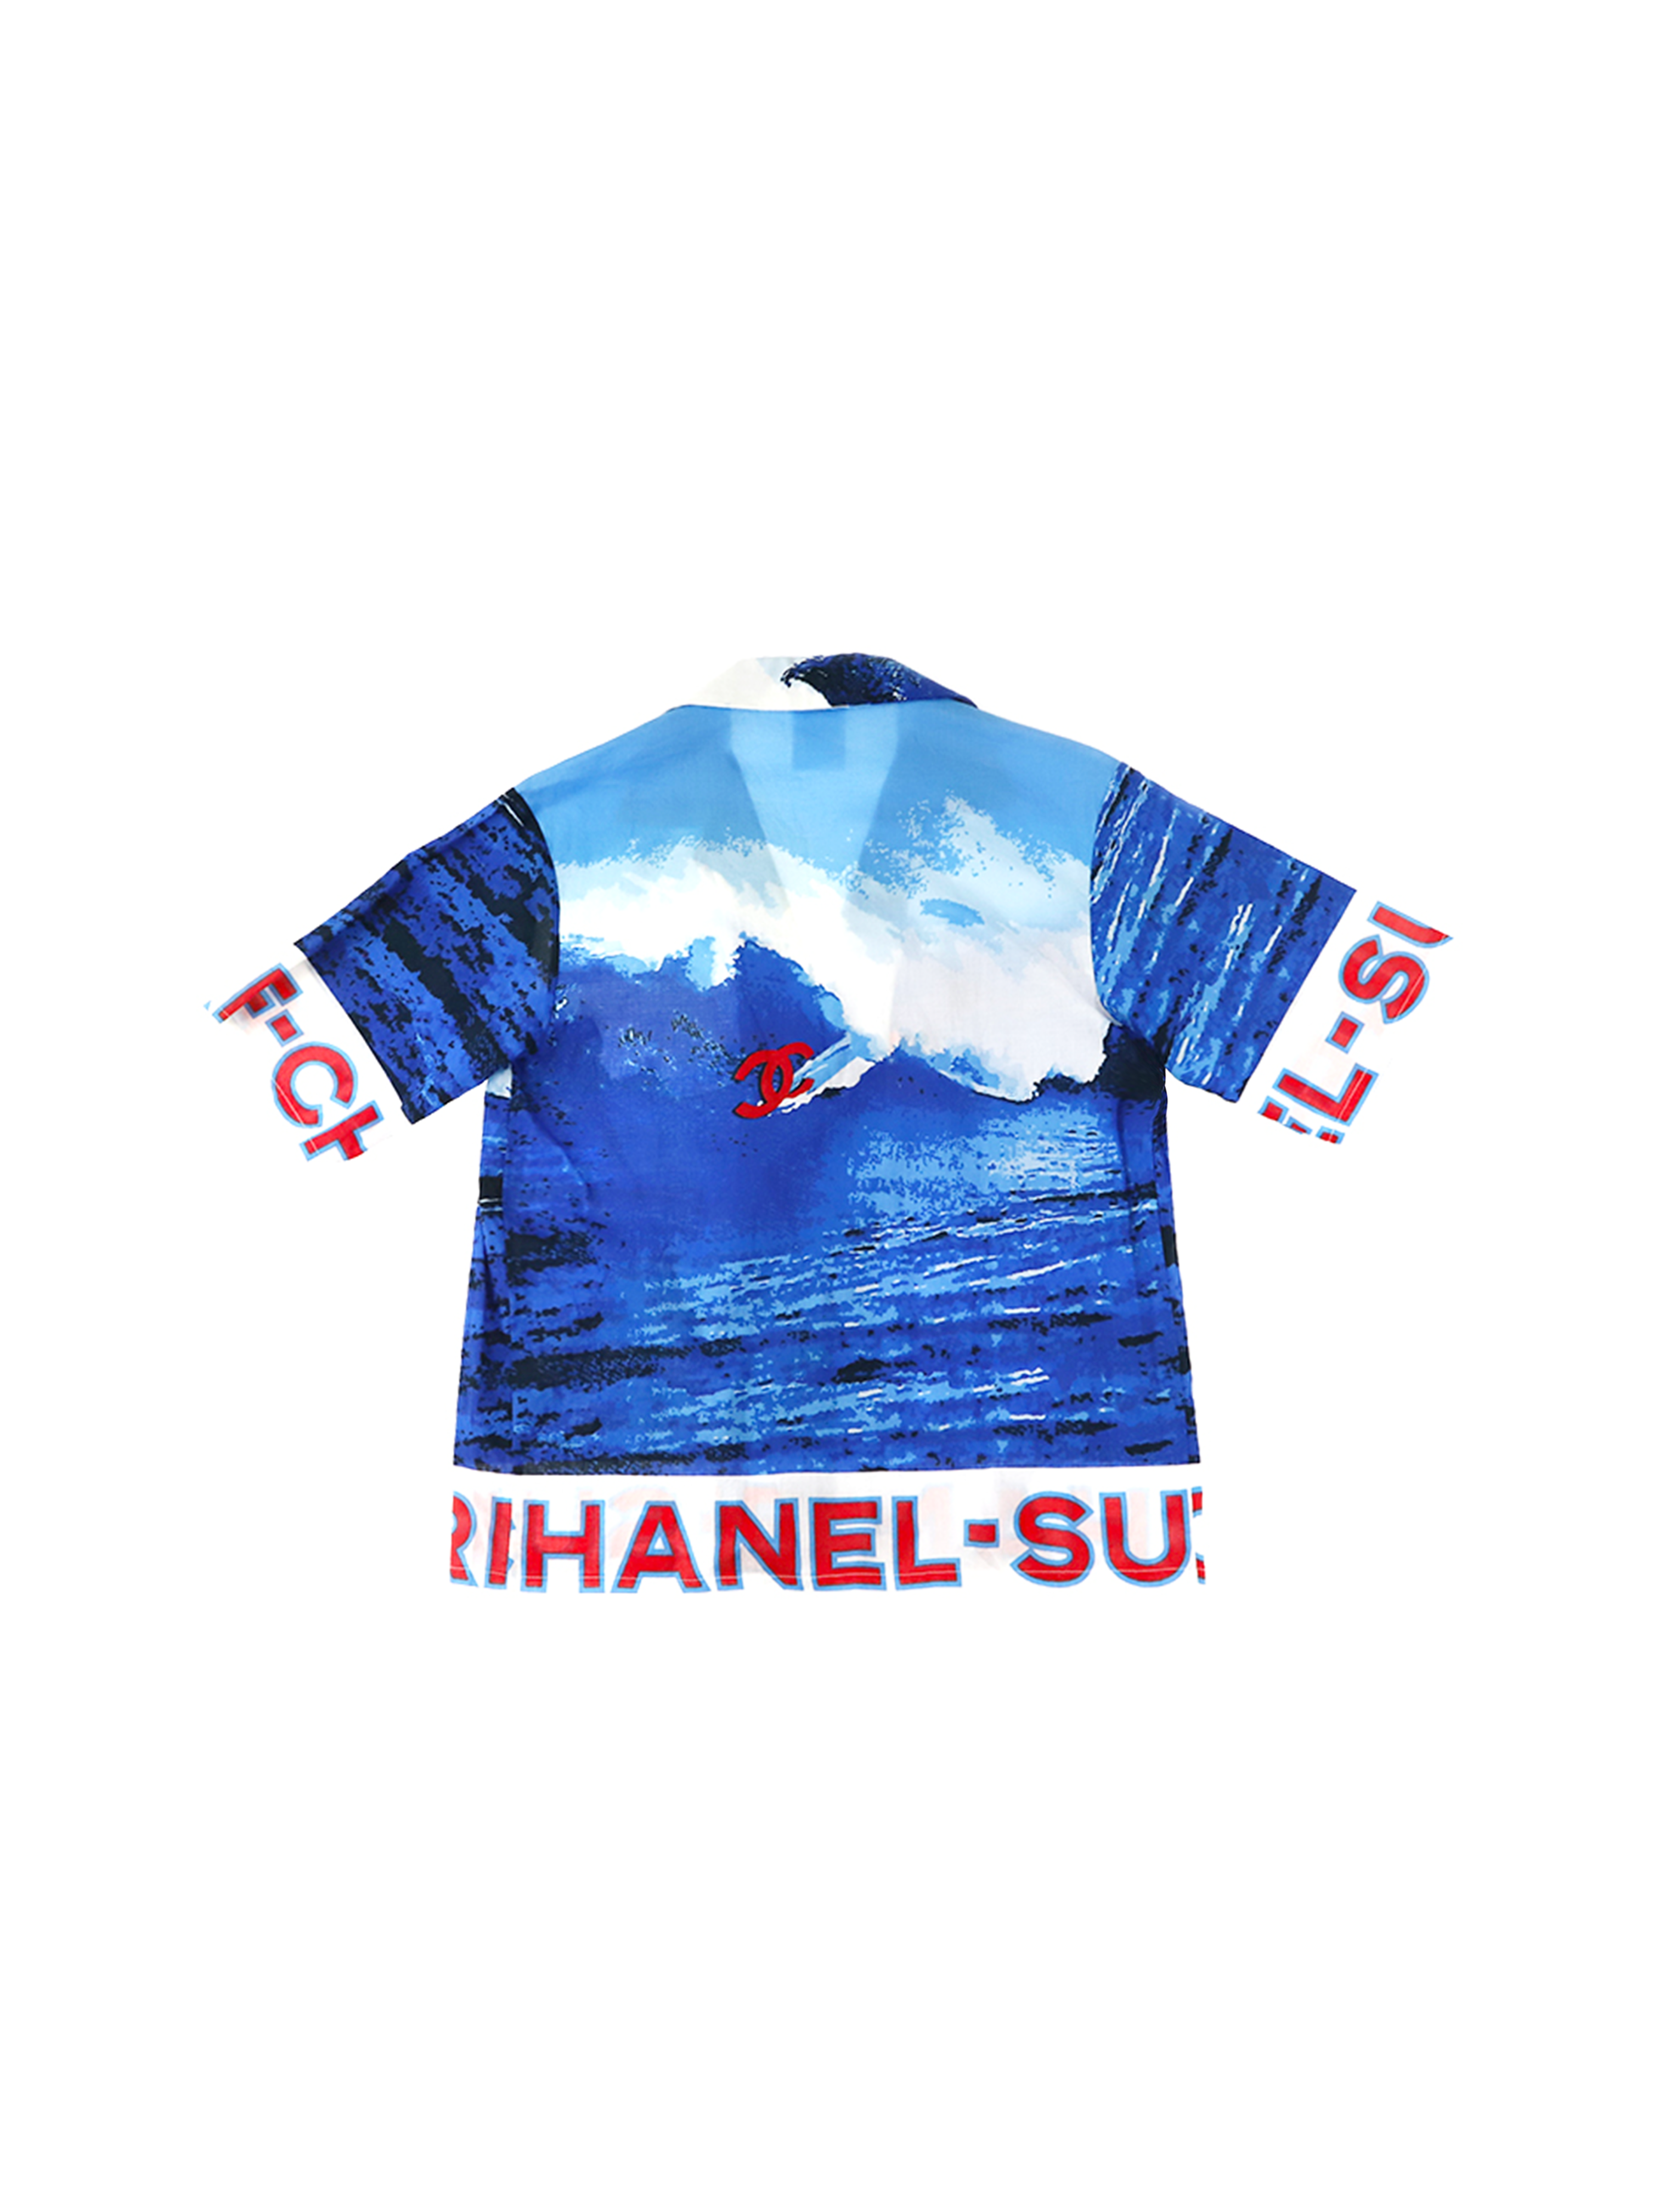 Chanel Surf 2002 SS Button-Up Short Sleeve